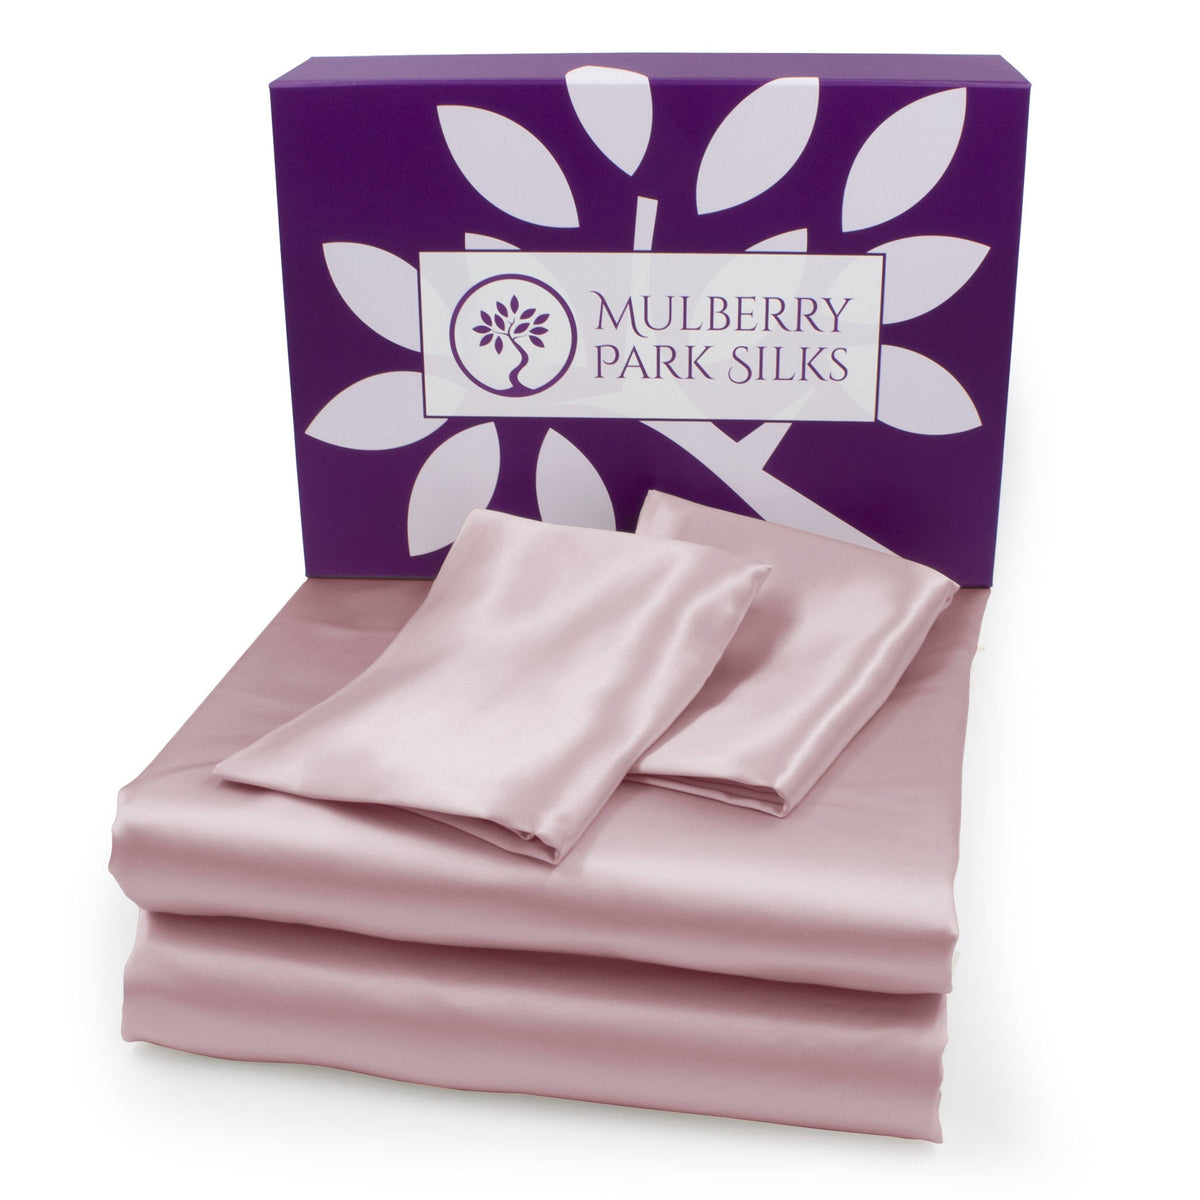 Mulberry Park Silks 22 Momme Silk Sheet Sets RoseQuartz with Giftbox